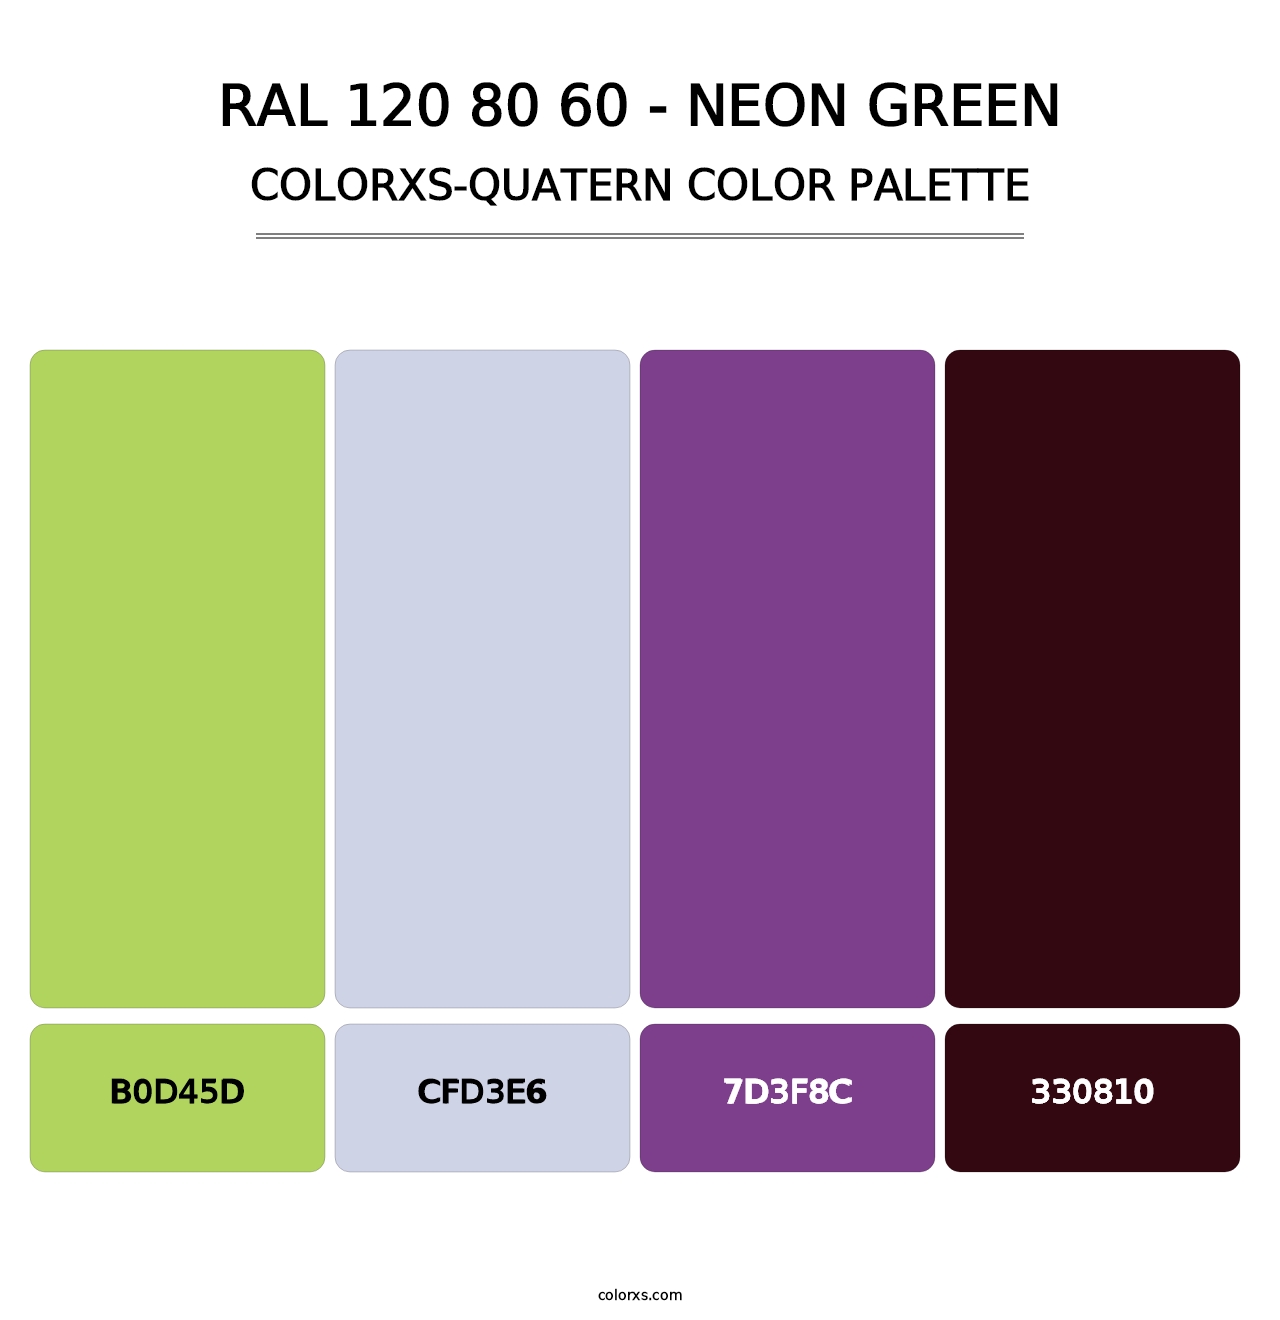 RAL 120 80 60 - Neon Green - Colorxs Quatern Palette